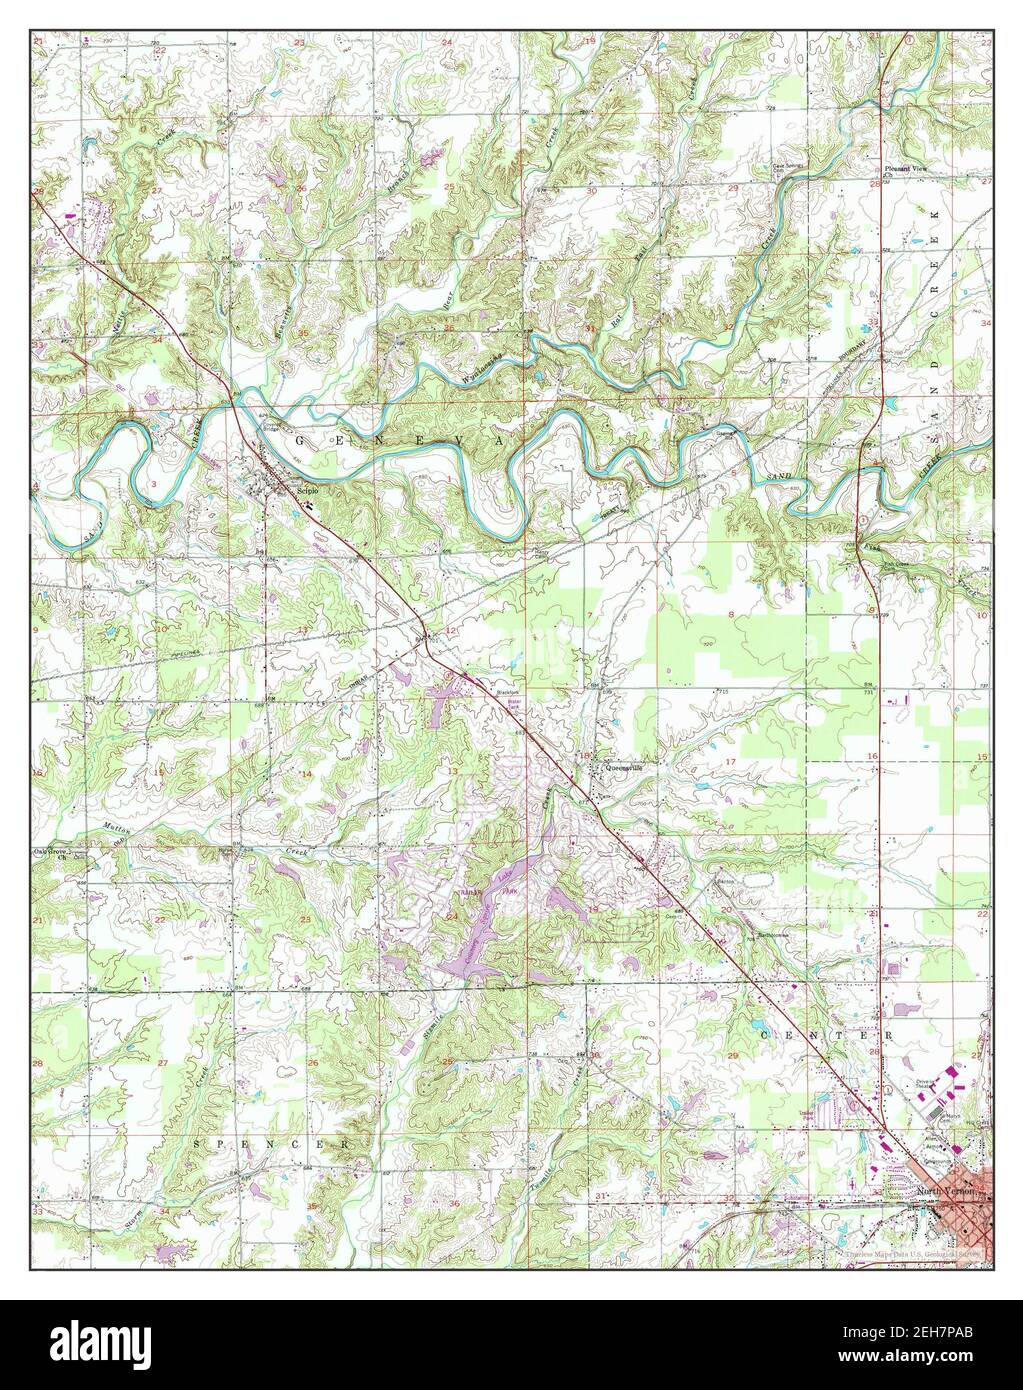 North Vernon, Indiana, map 1957, 1:24000, United States of America by Timeless Maps, data U.S. Geological Survey Stock Photo